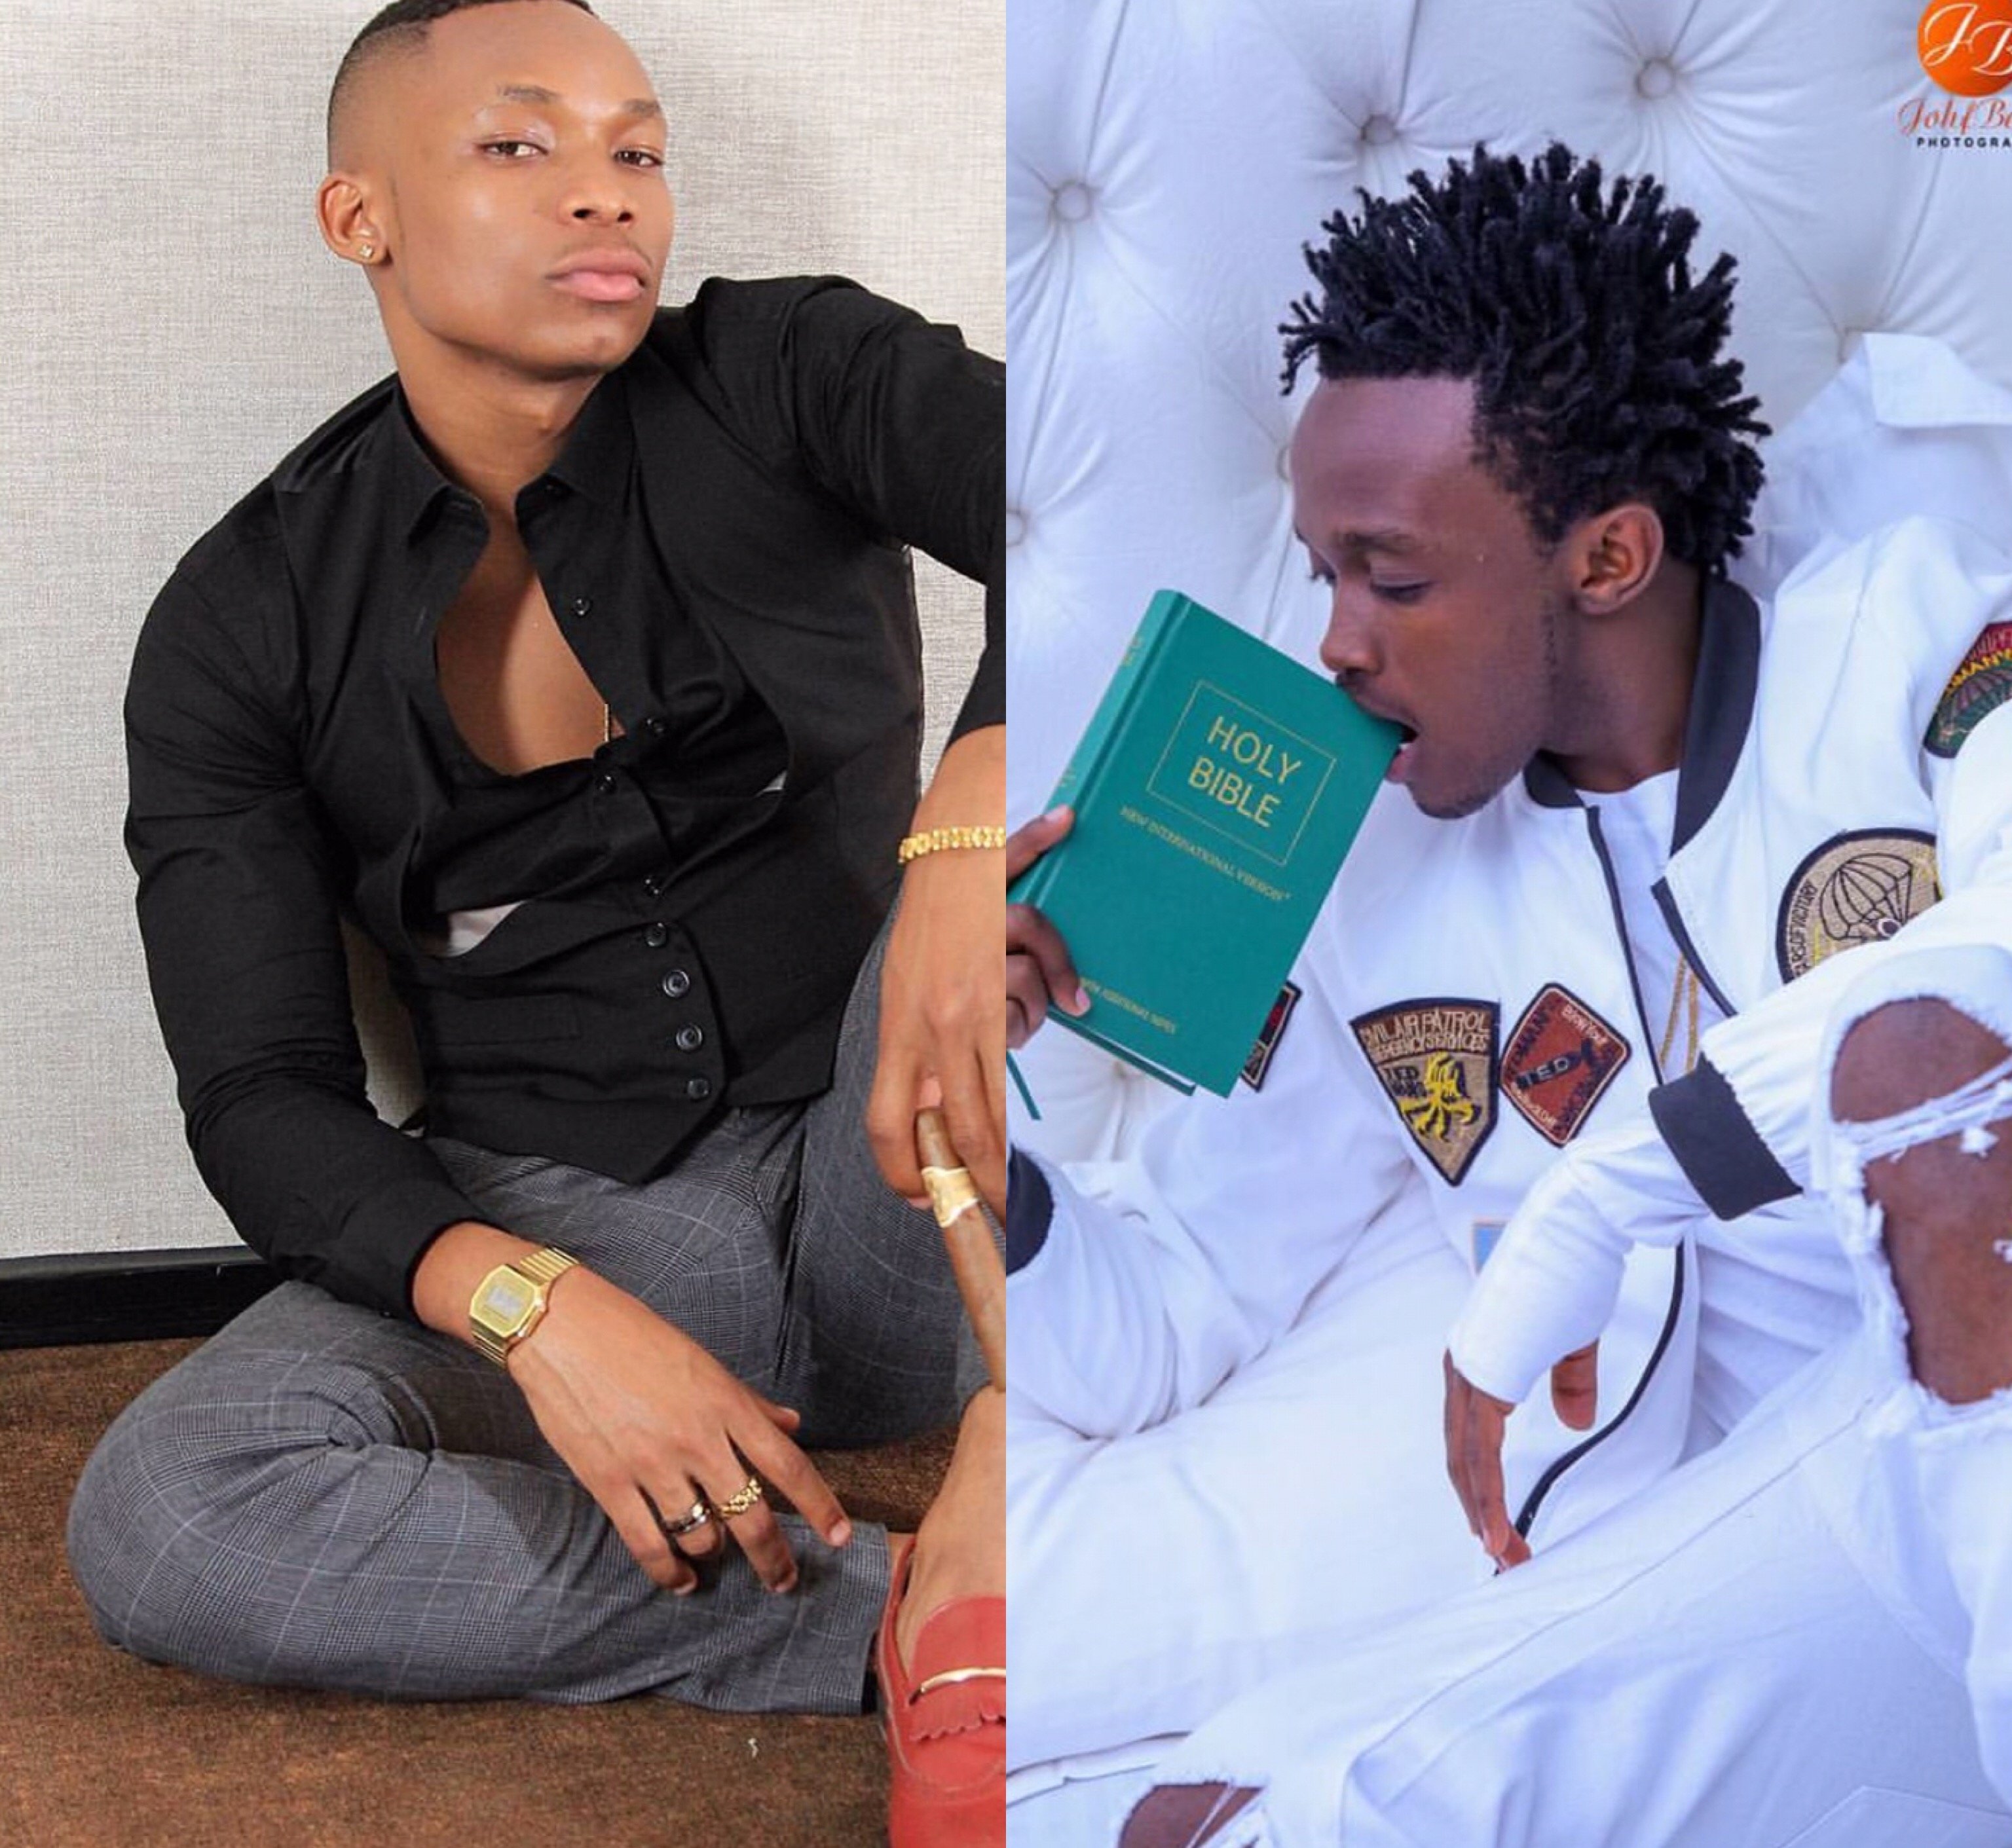 Zero chills: Otile Brown throws shade at Bahati’s new song and asks him to get some vocal training